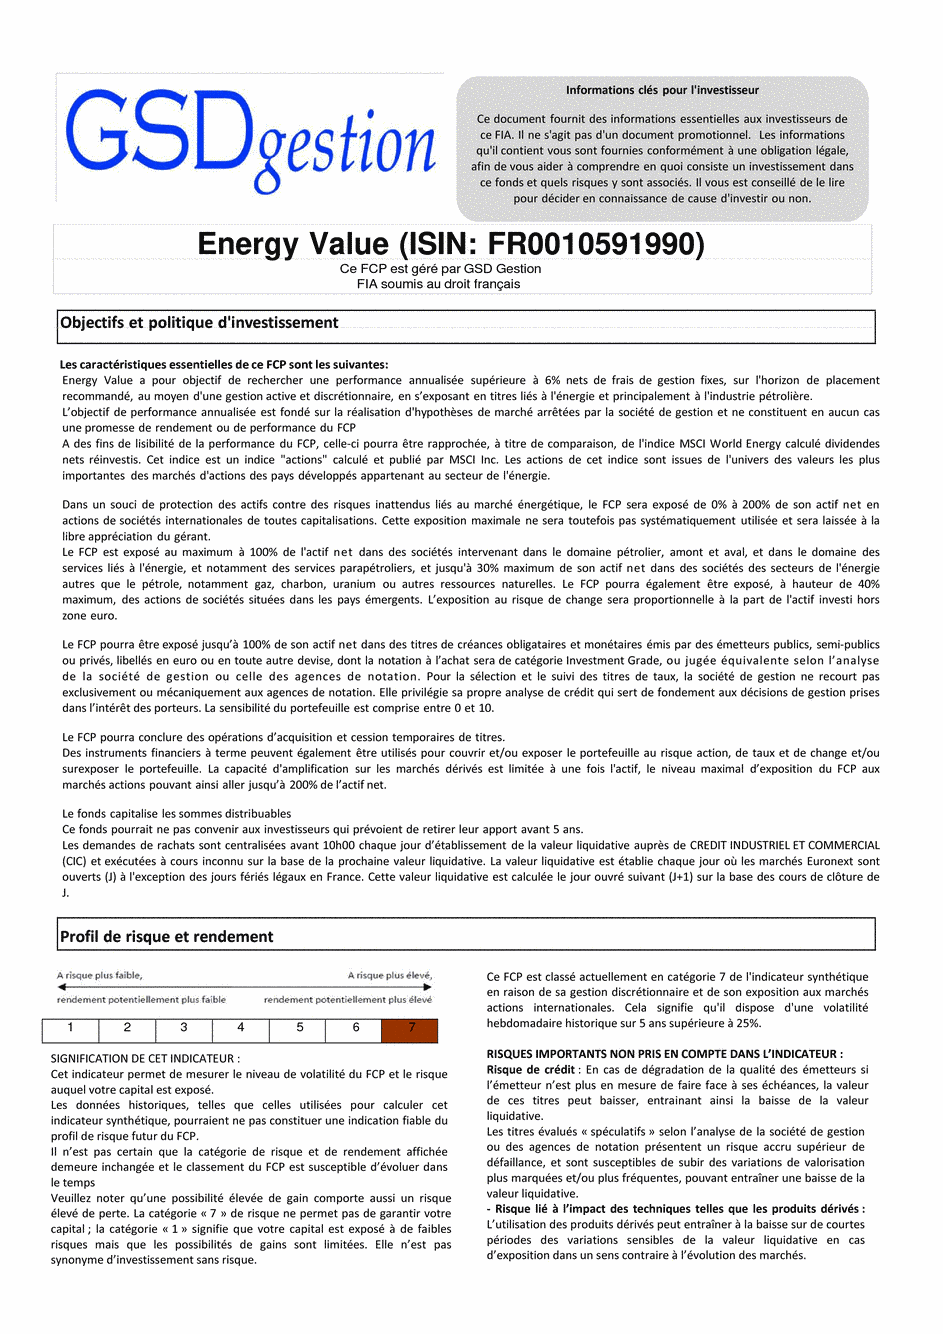 DICI-Prospectus Complet Energy Value - 09/11/2017 - undefined